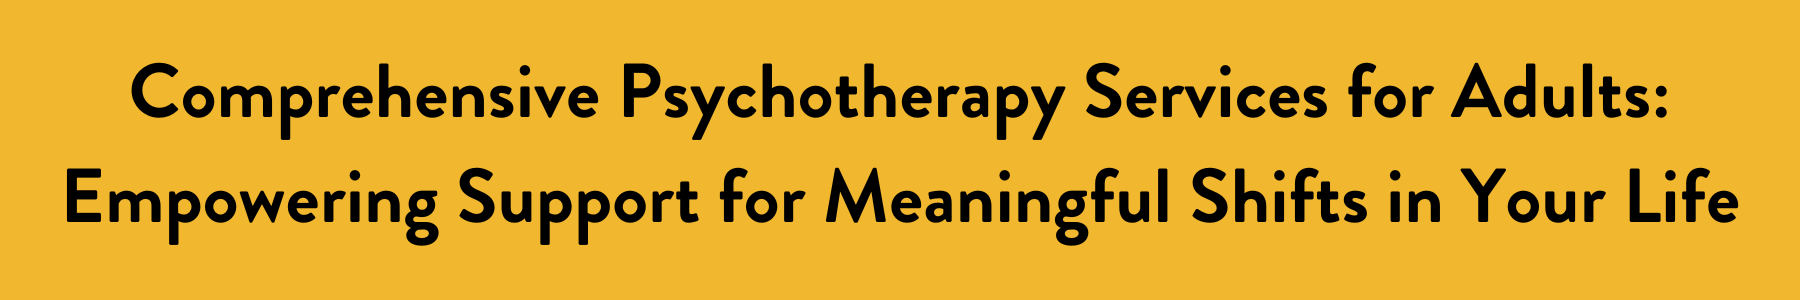 Comprehensive Psychotherapy Services for Adults: Empowering Support for Meaningful Shifts in Your Life